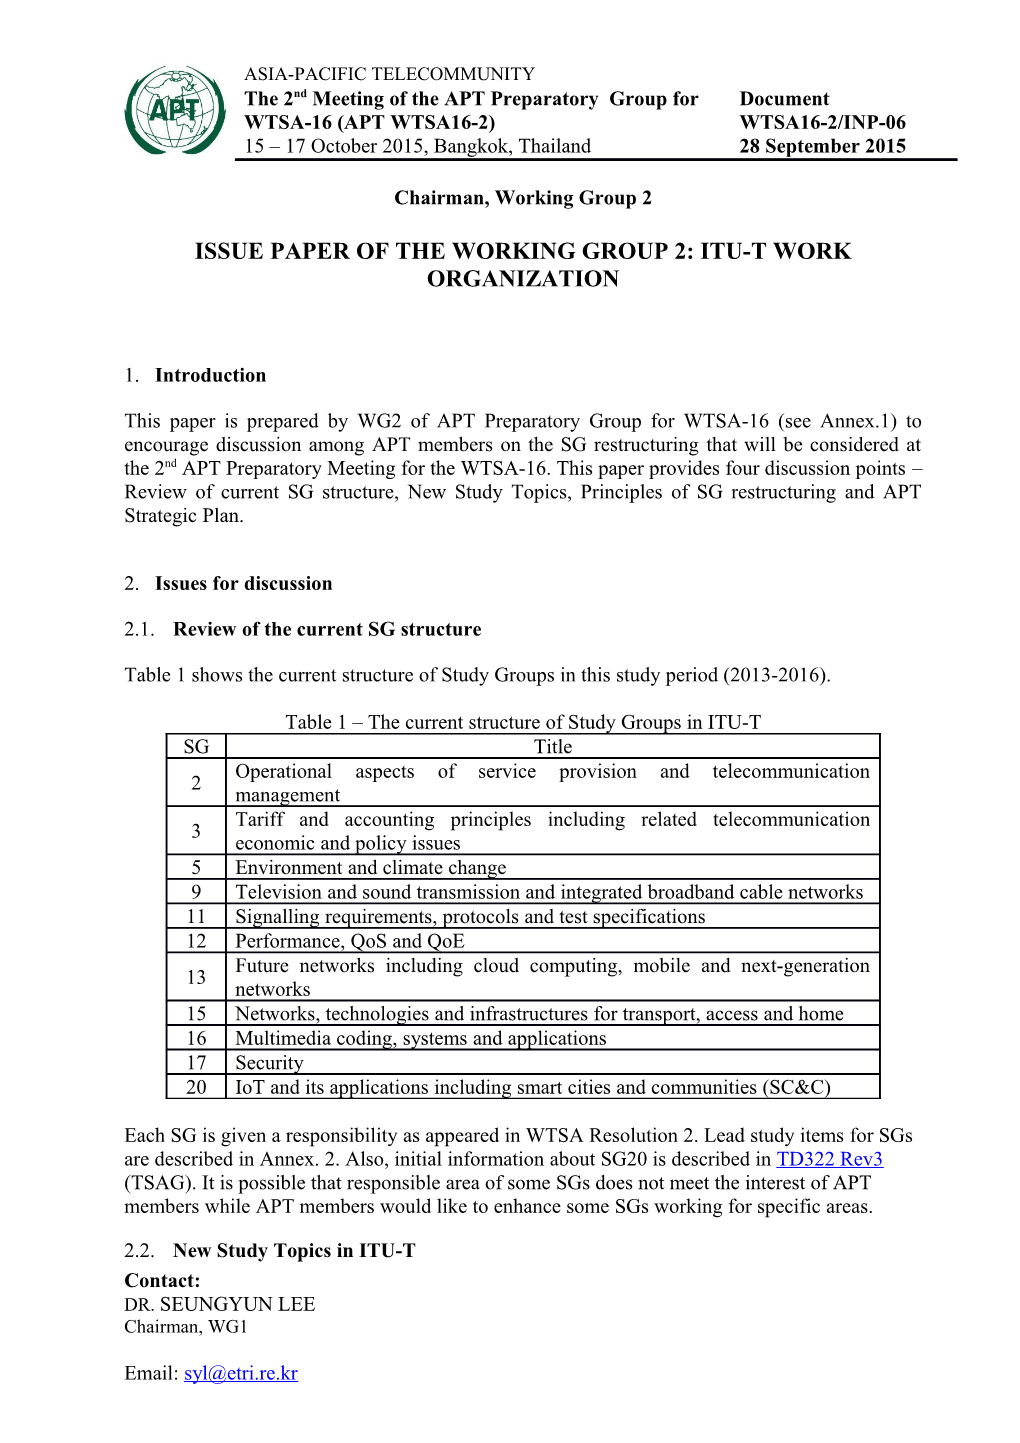 Issue Paper of the Working Group 2: ITU-T Work Organization